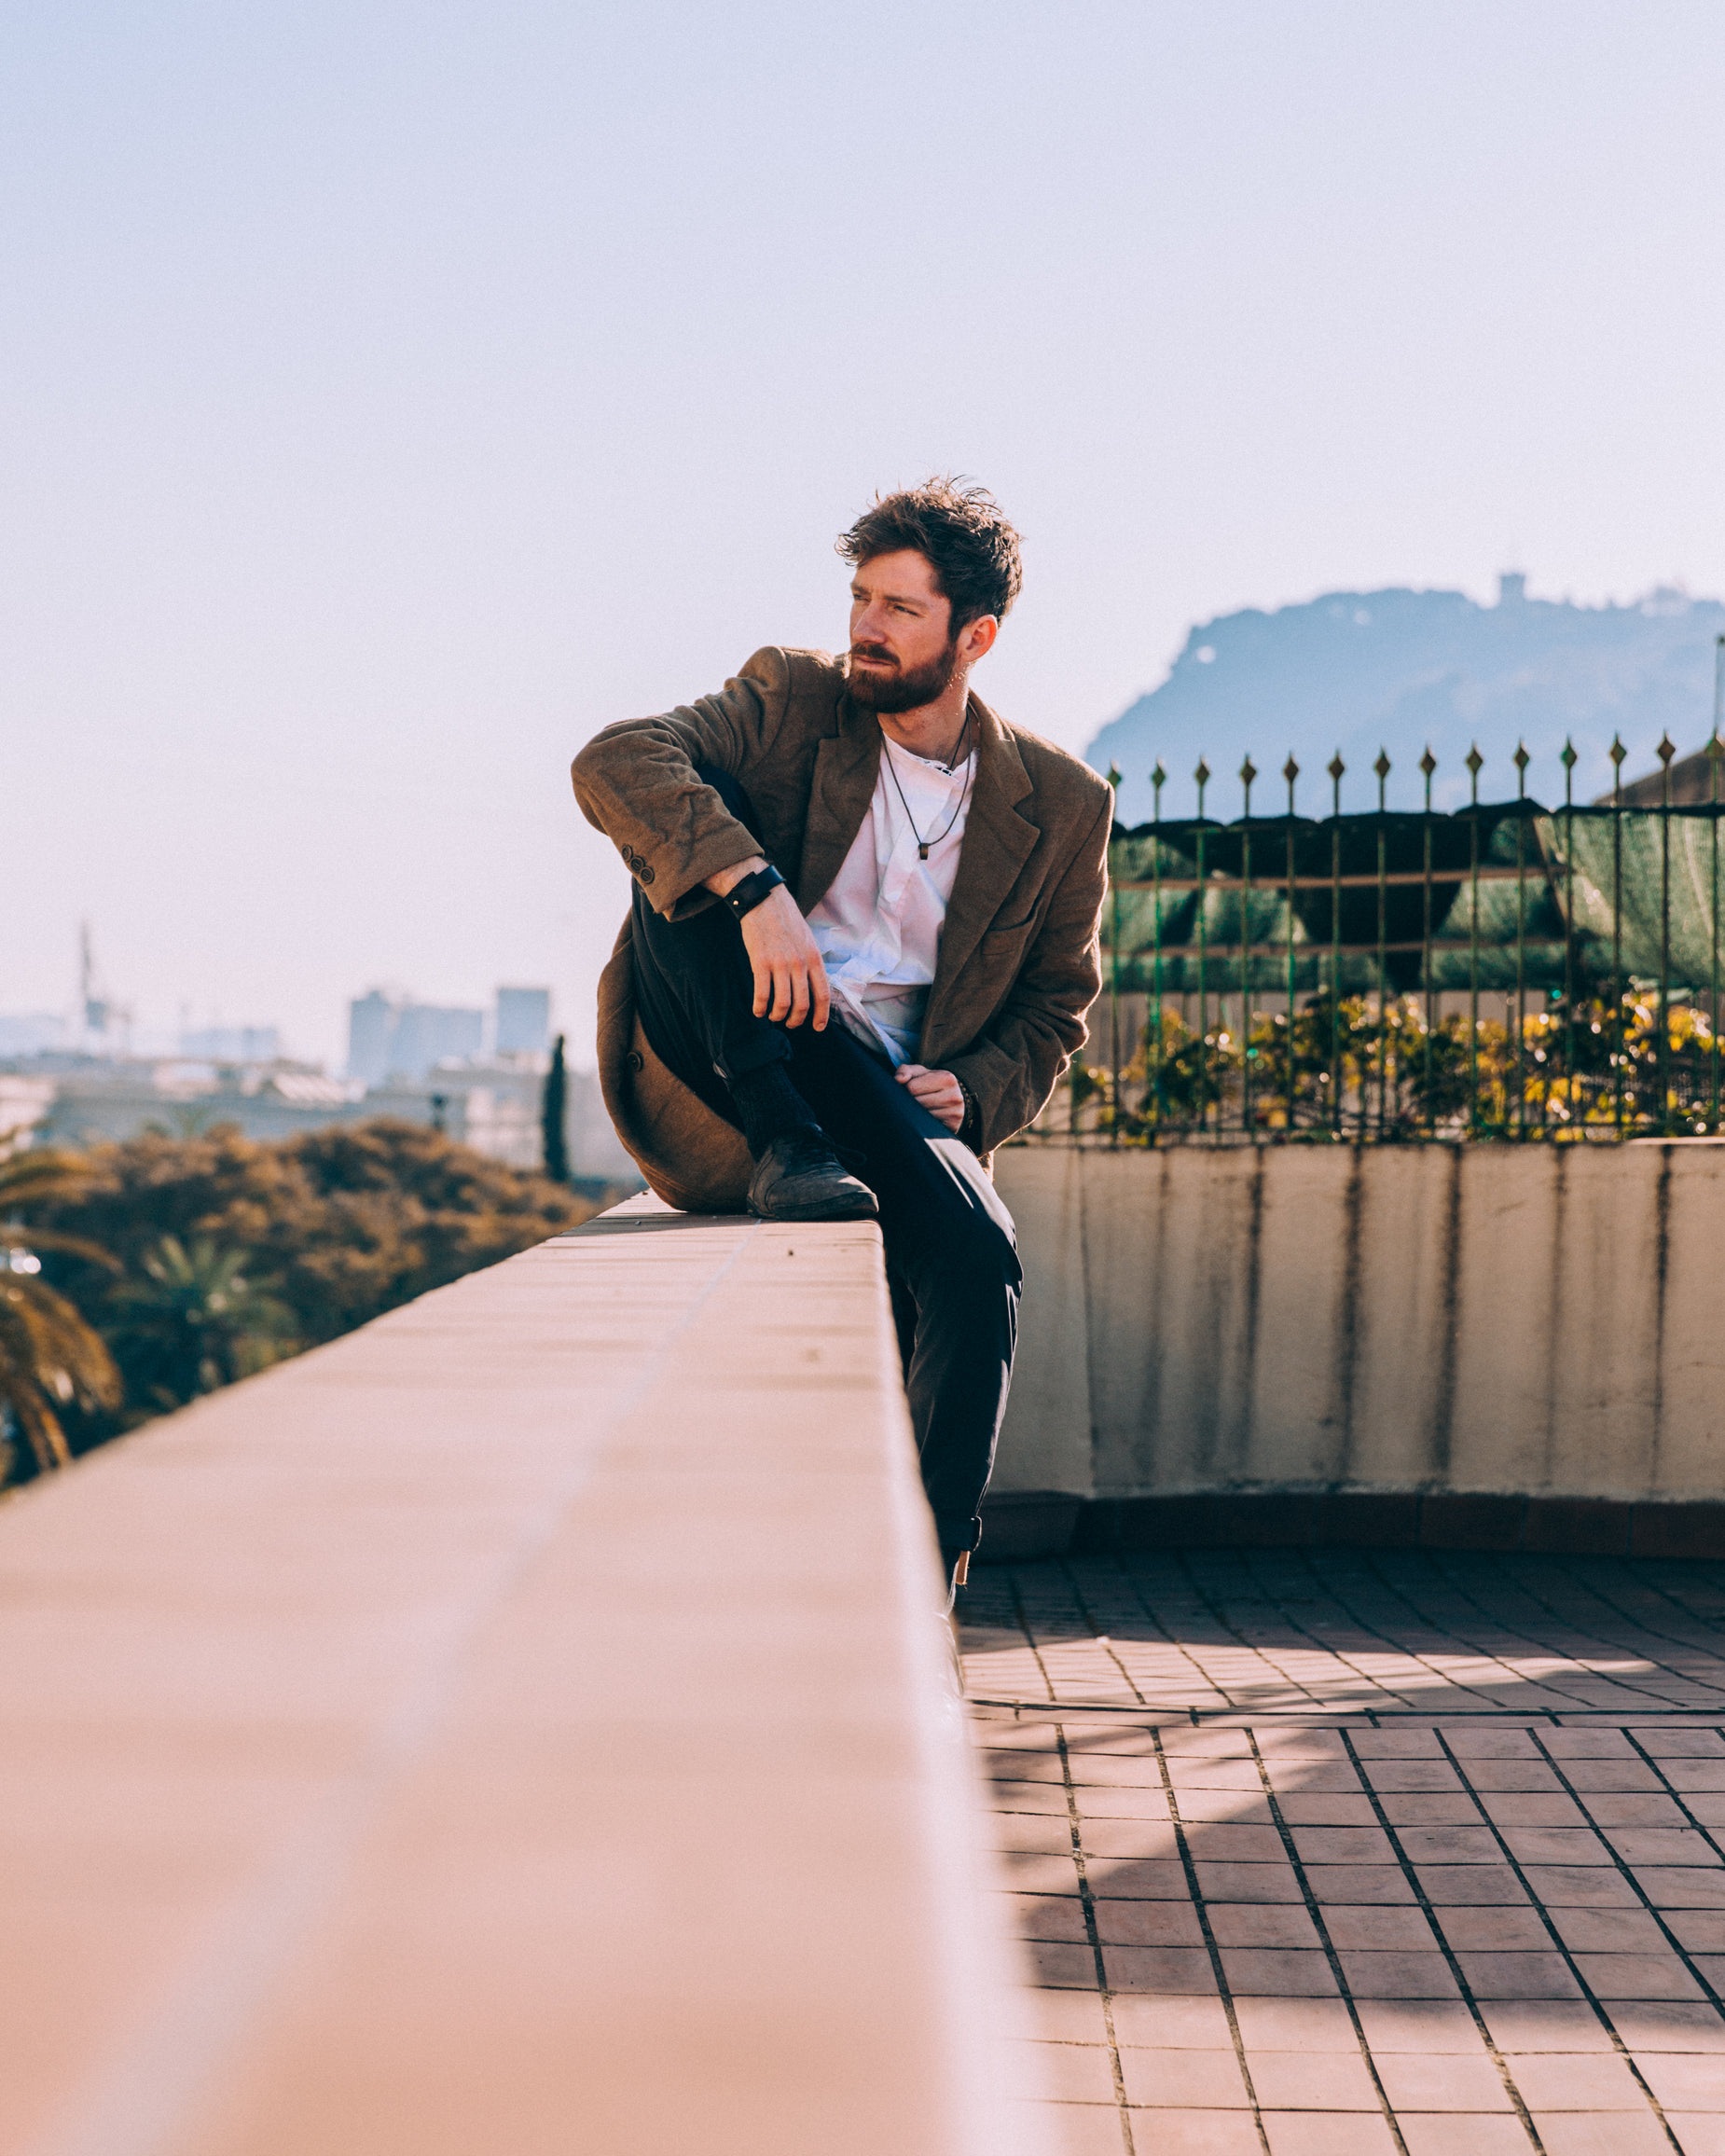 Browse Free HD Images of Man Sitting Comfortably On Roof Ledge